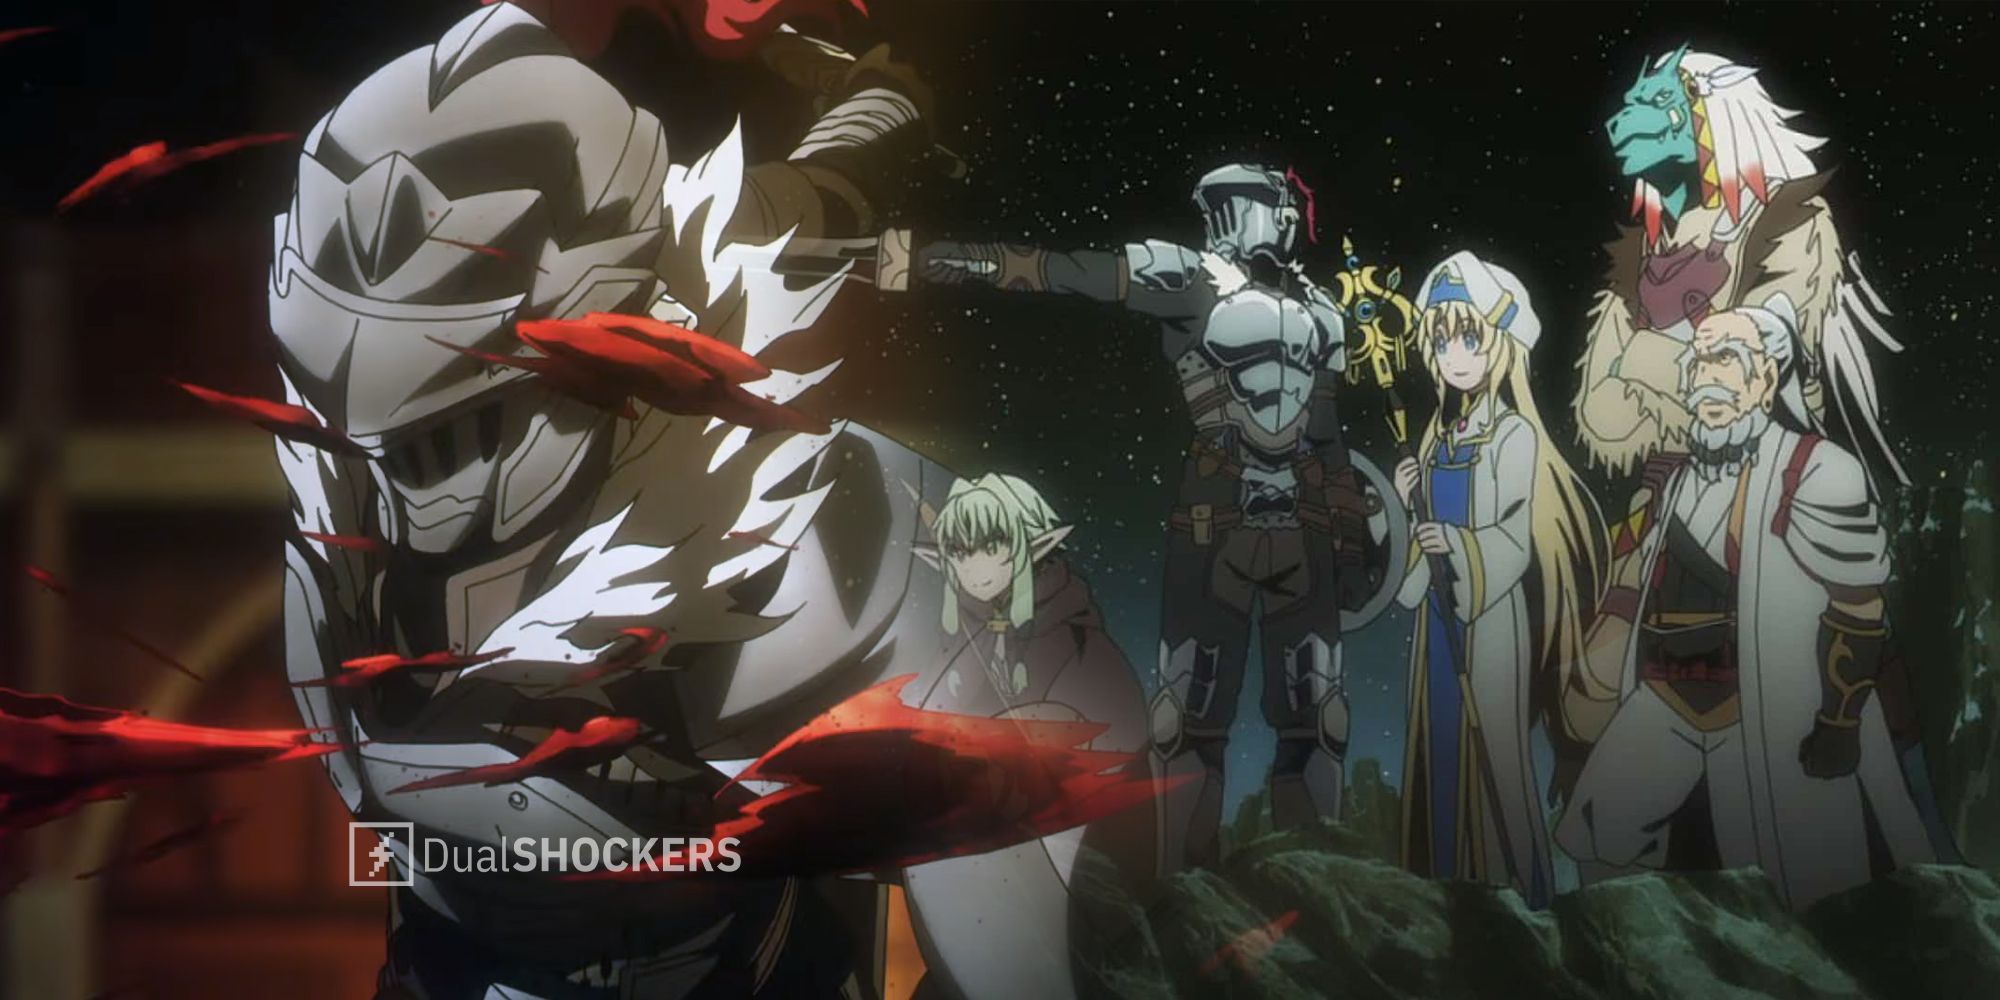 Goblin Slayer season 2 episode 2 release date and time, where to